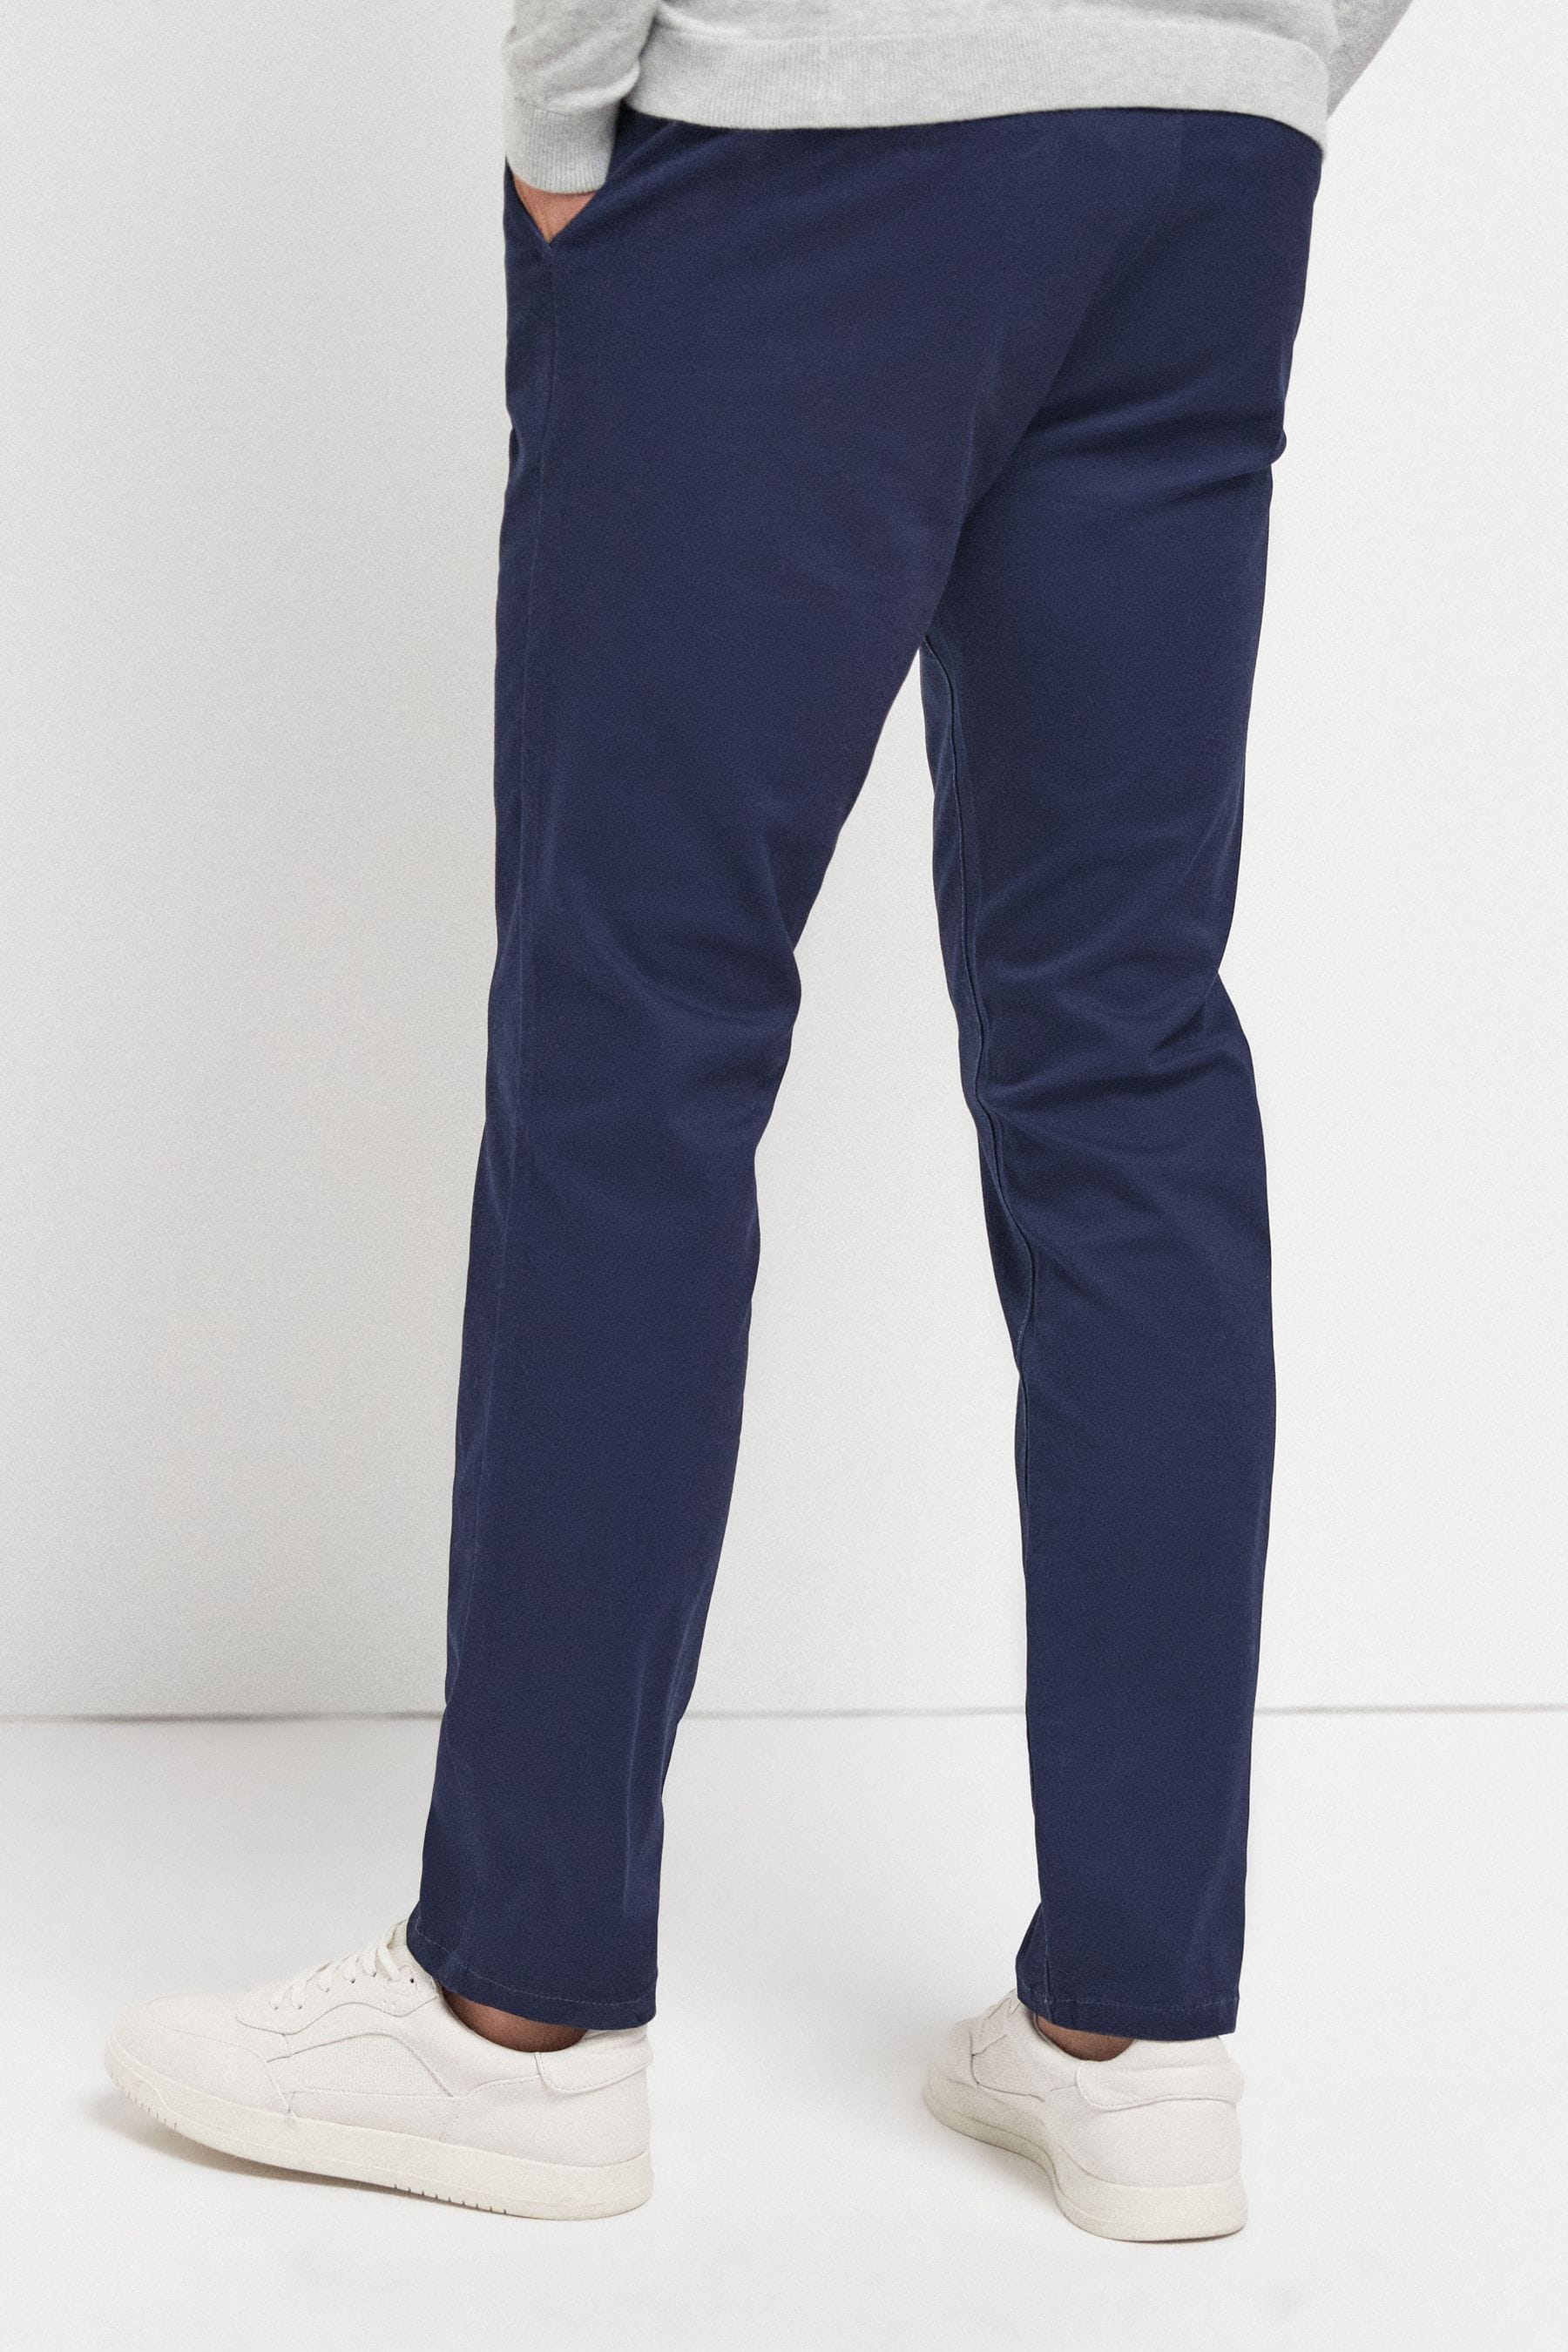 Buy French Navy Slim Stretch Chino Trousers from the Next UK online shop